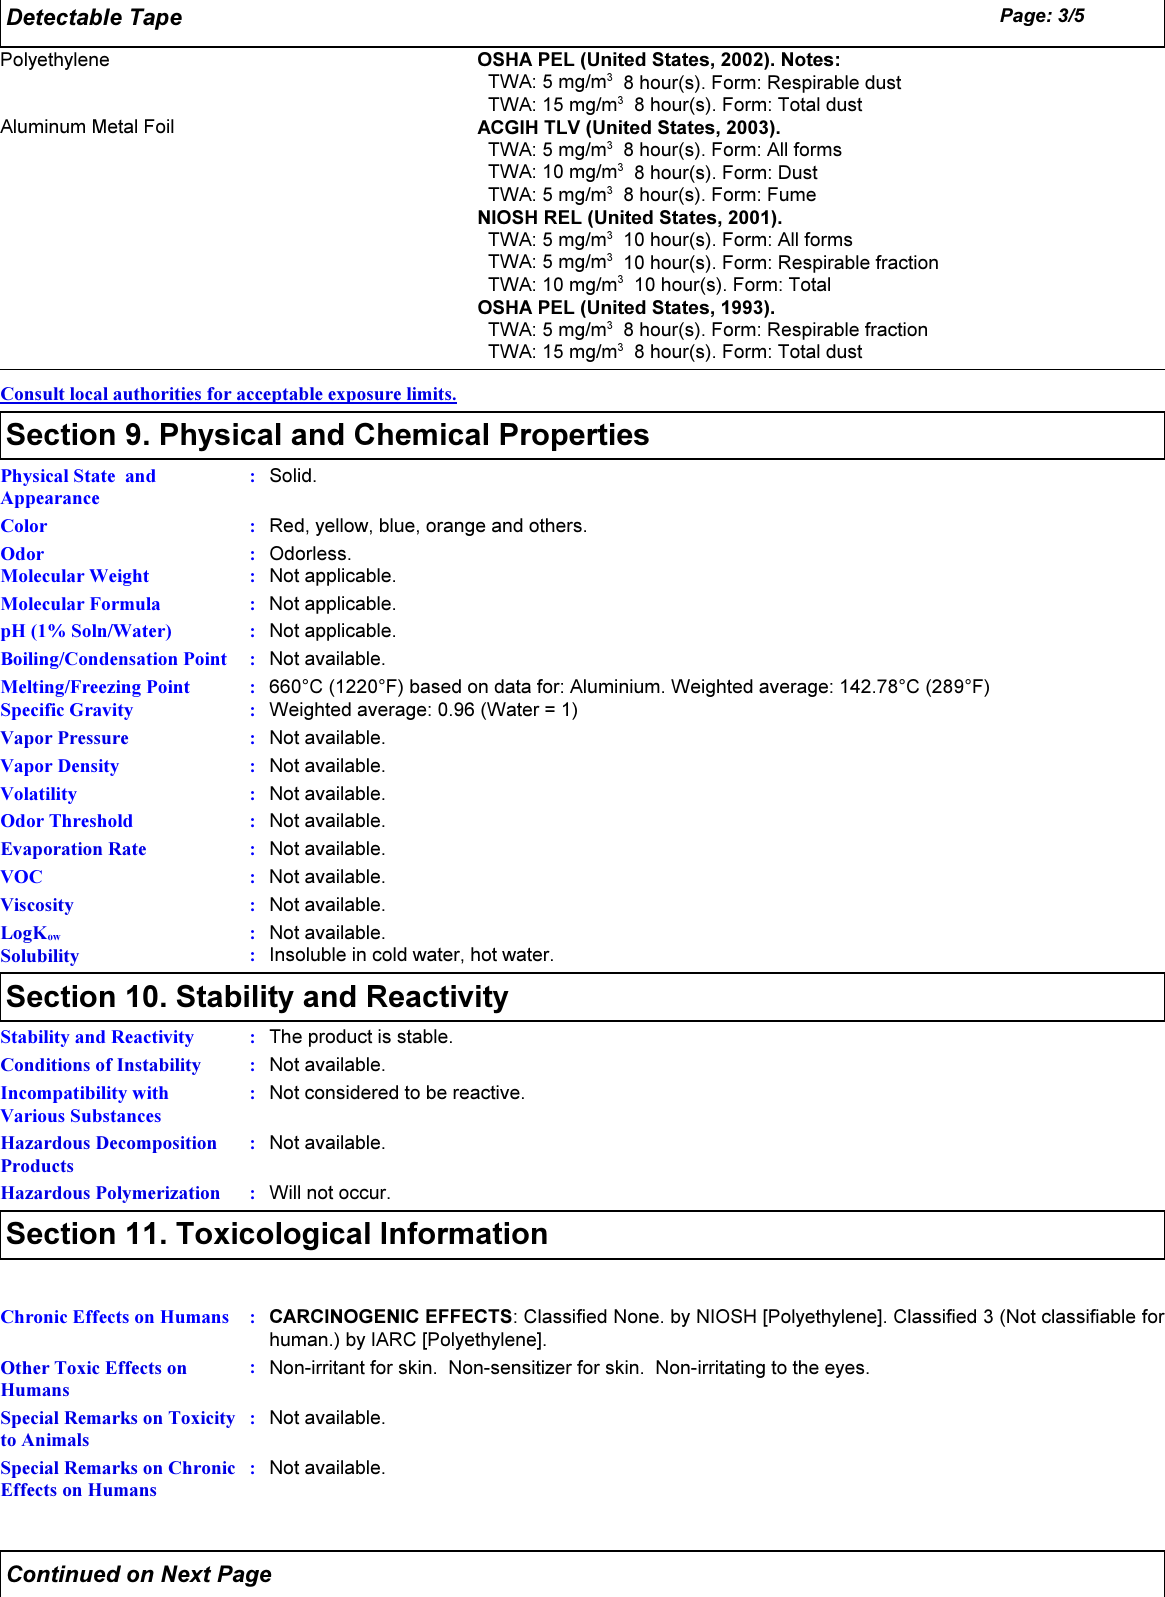 Page 3 of 5 - CHEMMATE2732  122429-MSDS